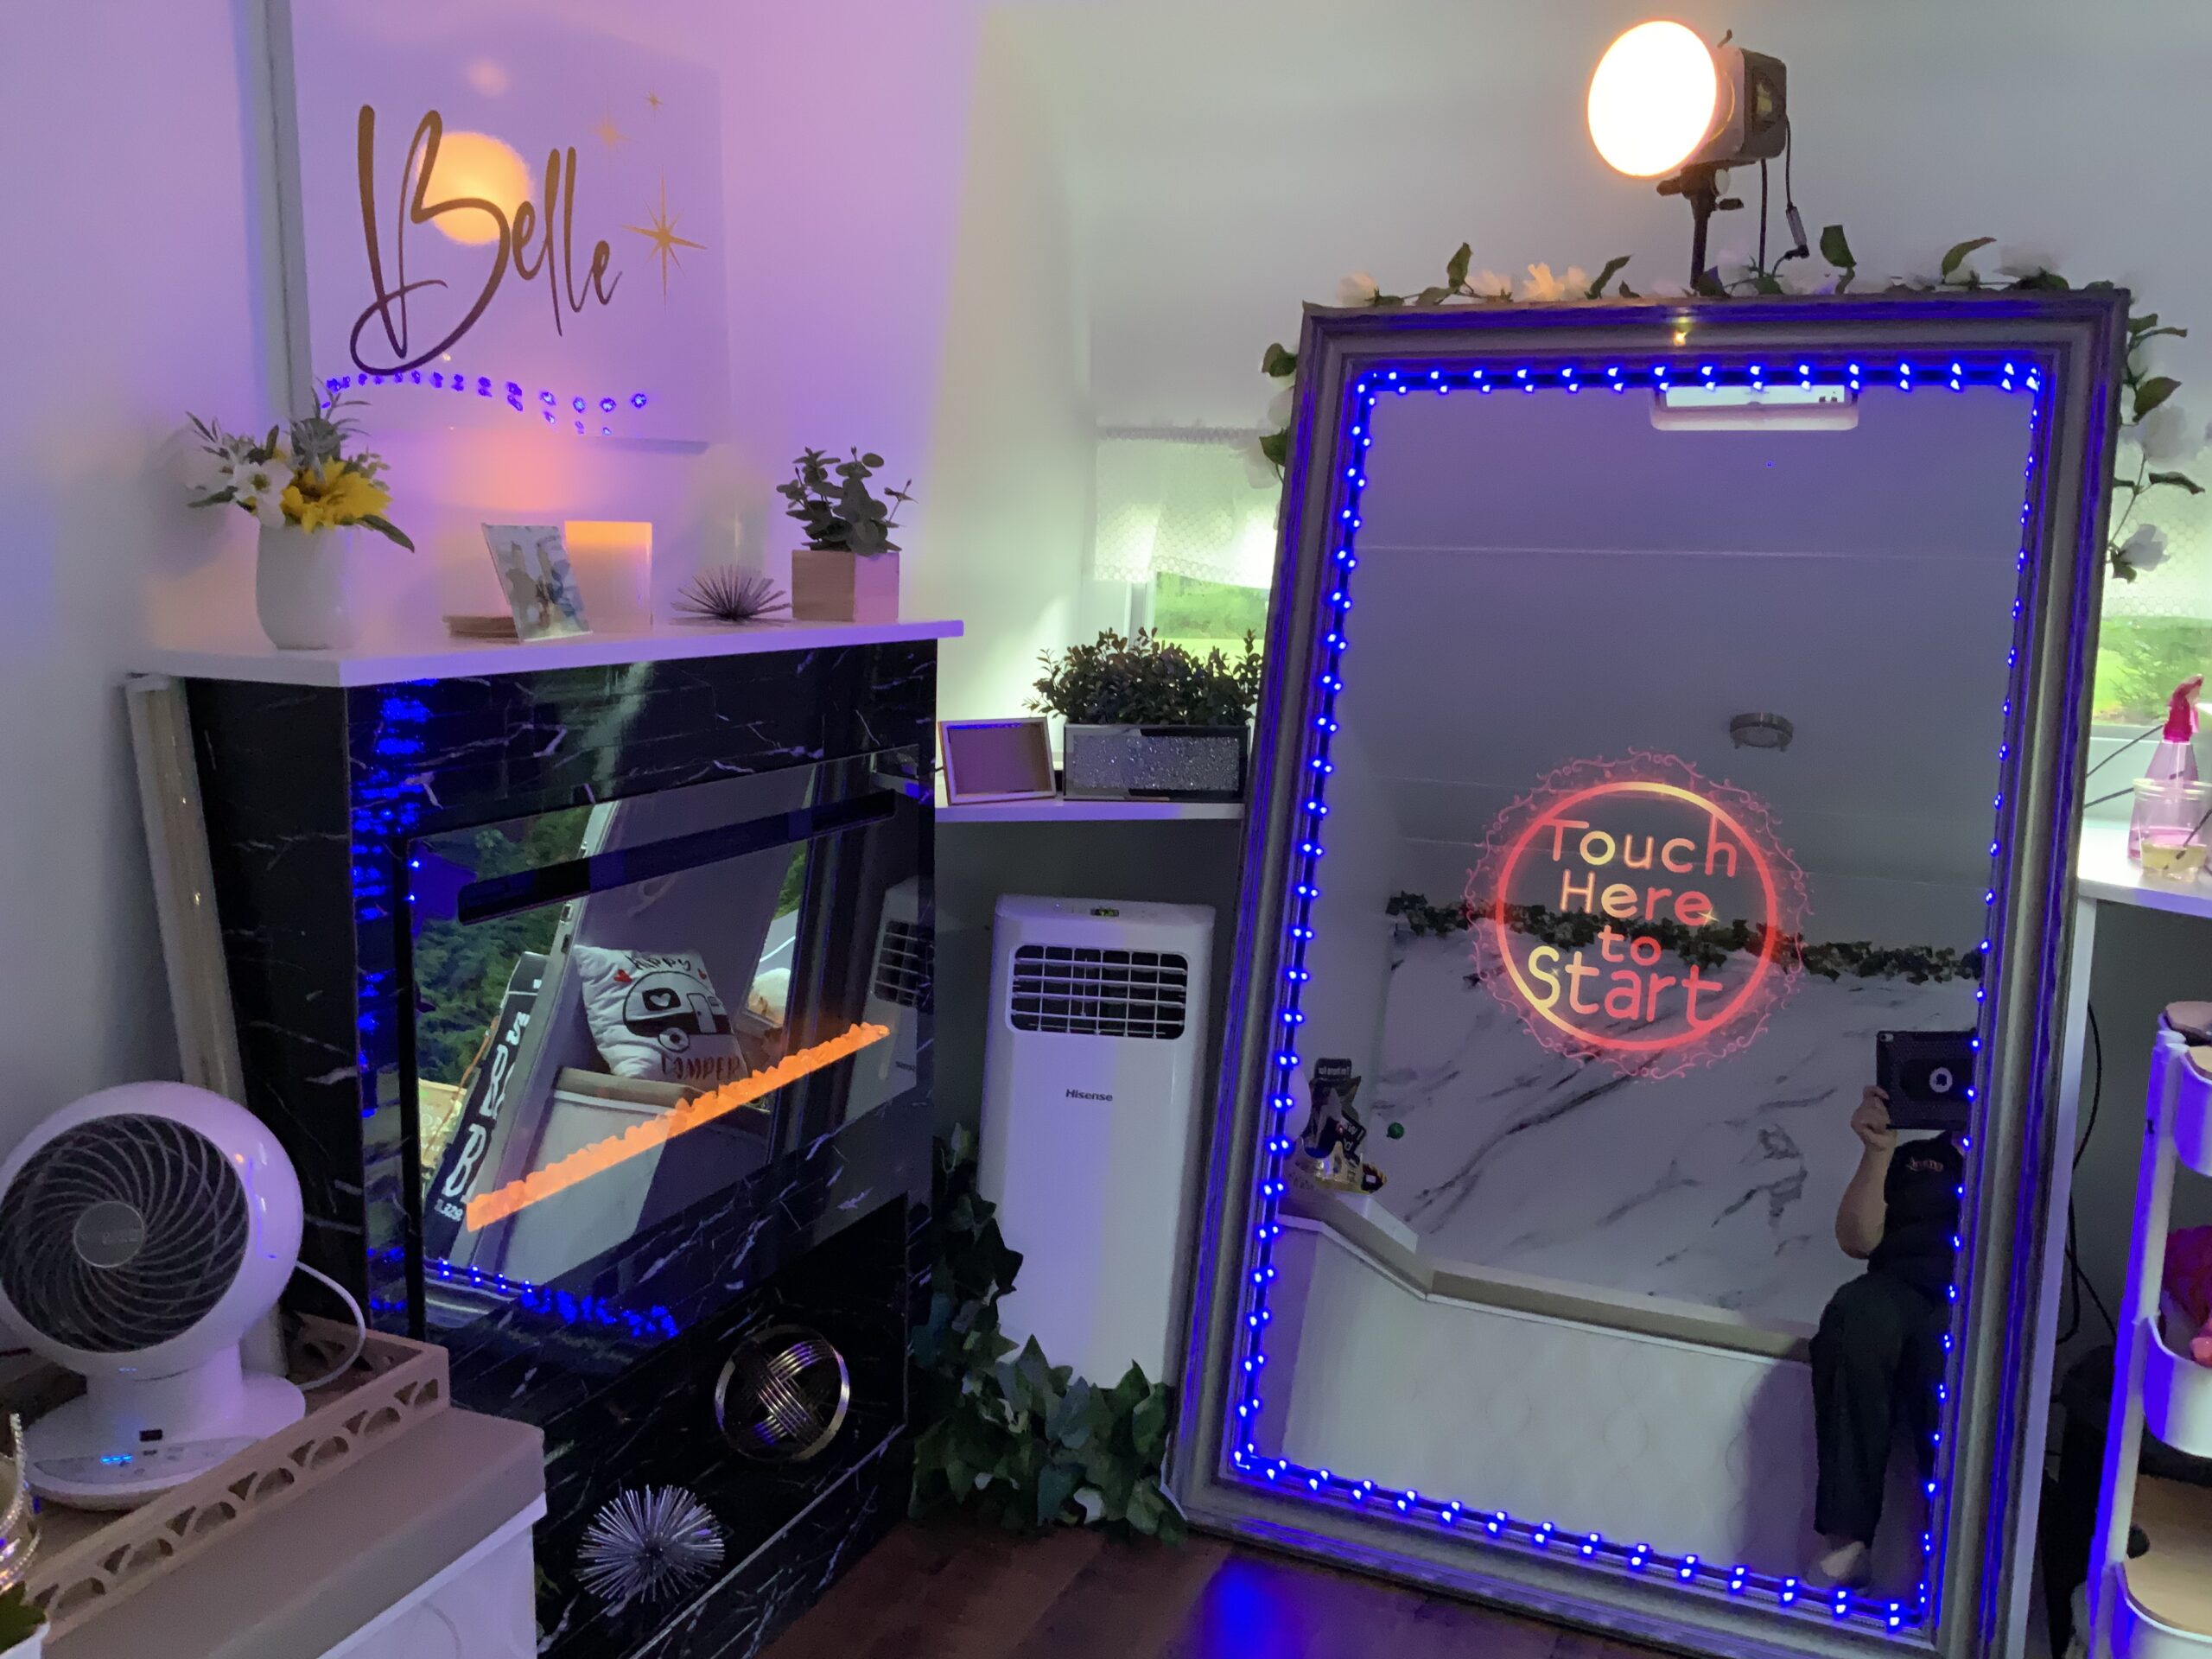 Inside Belle the camper photo booth 